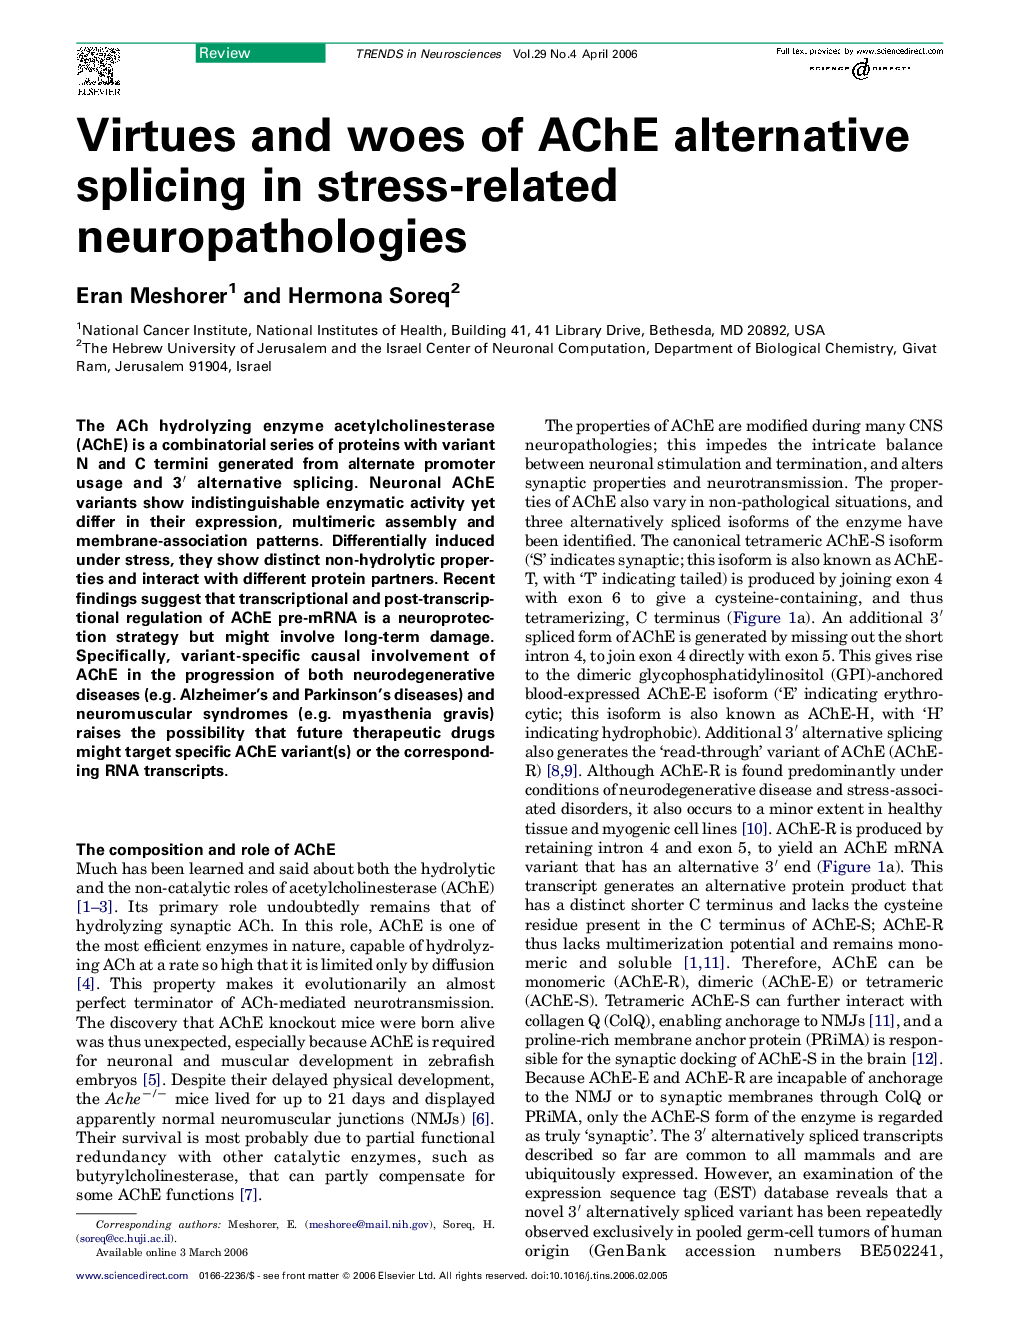 Virtues and woes of AChE alternative splicing in stress-related neuropathologies